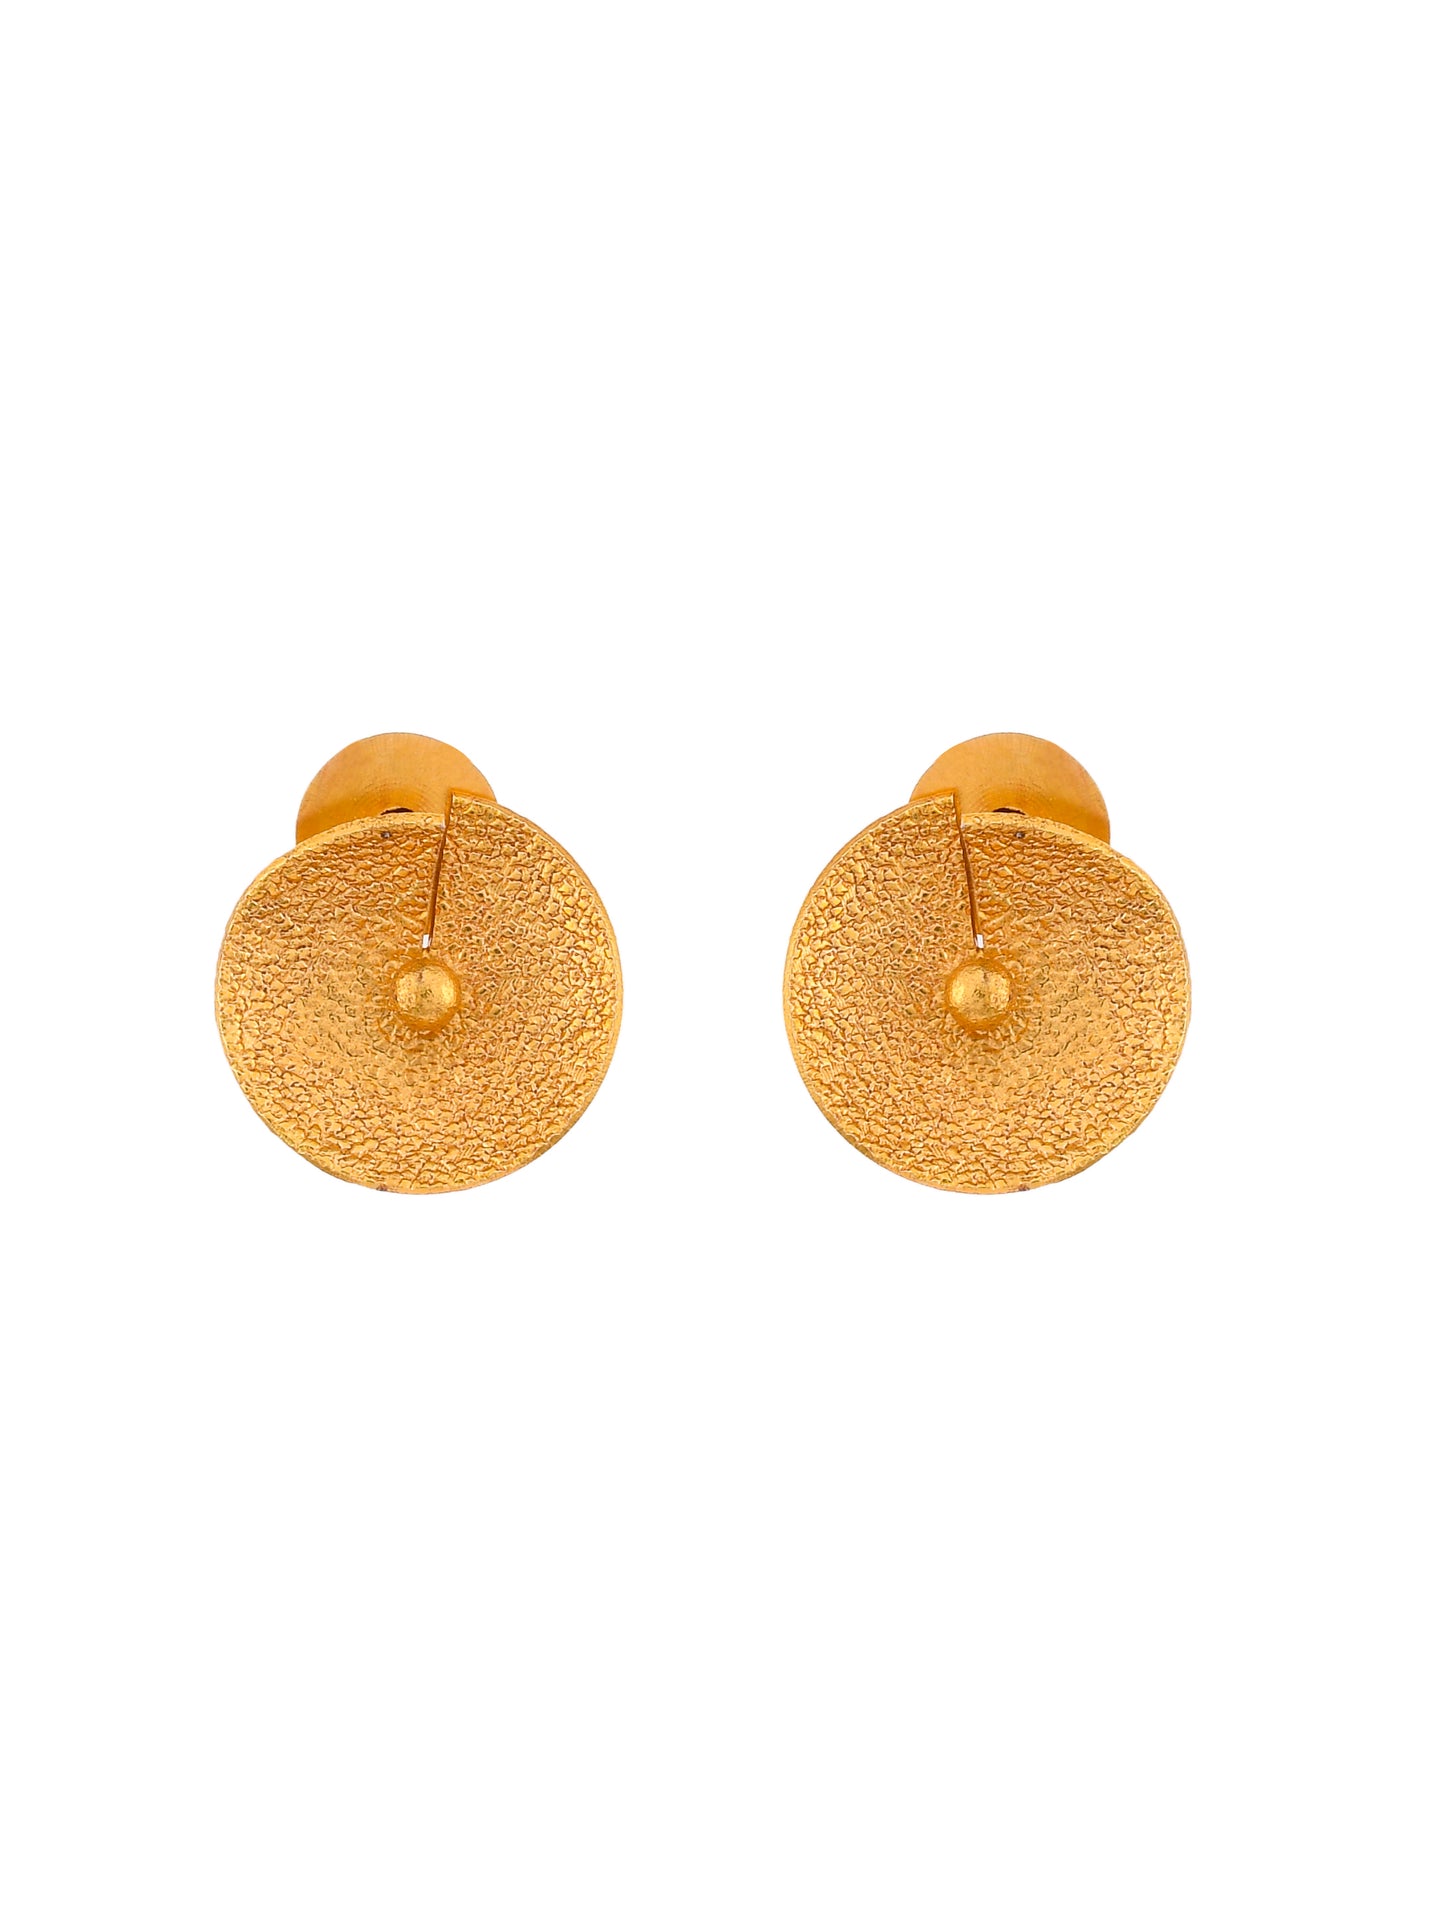 Gold-Plated Handcrafted Contemporary Studs Earrings